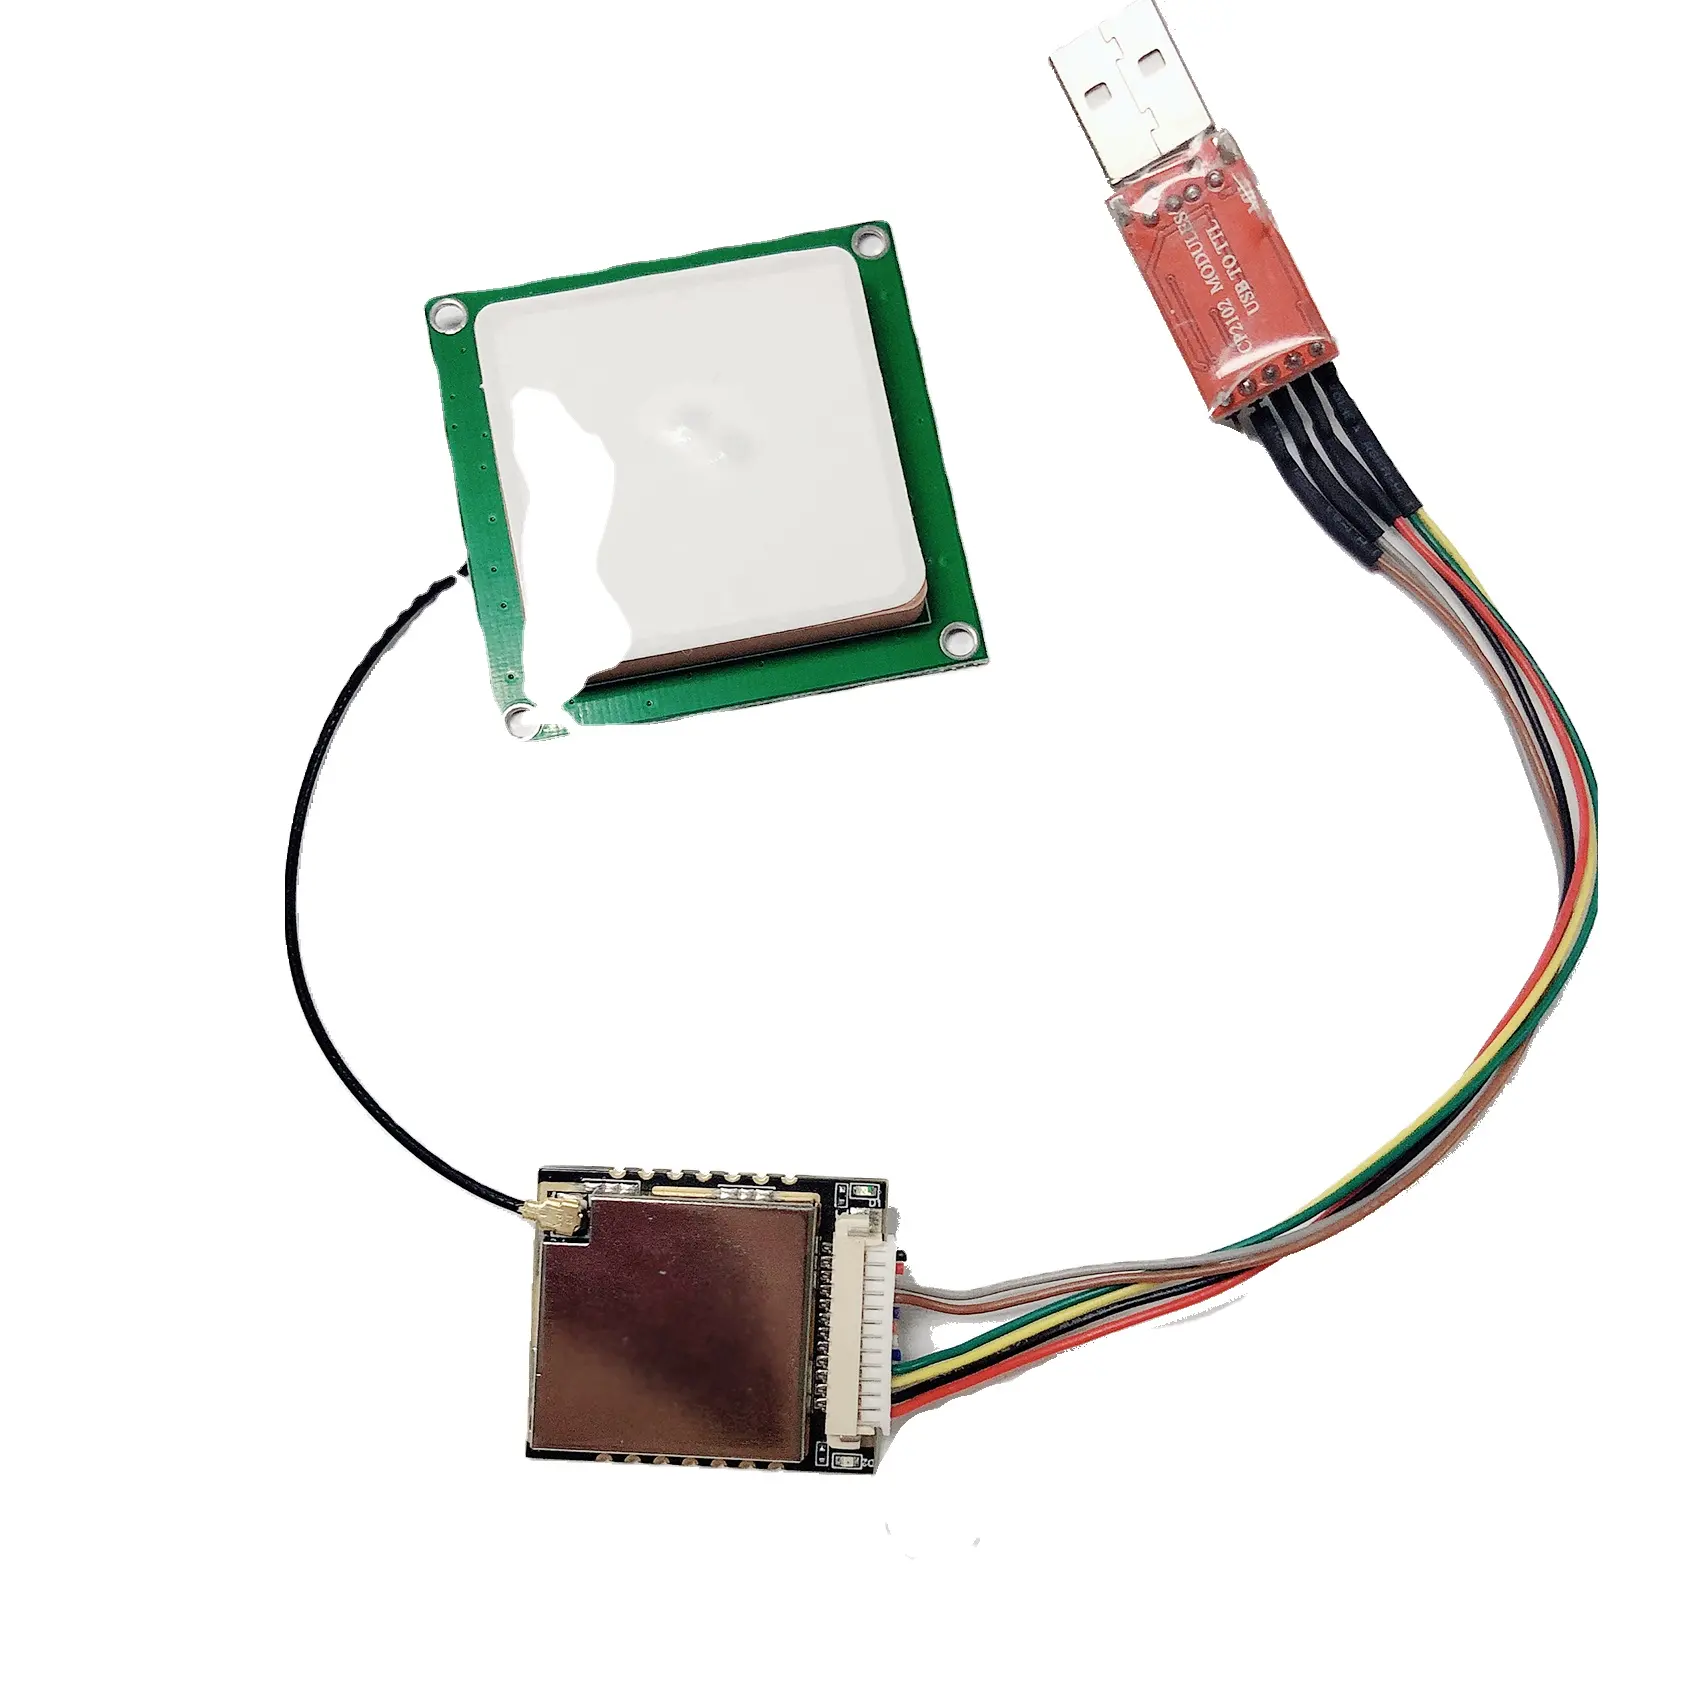 Uhf Rfid Reader Module Supplier Jietong UHF RFID Small Size Multi-Tags Reading Access Control Reader Module With Development Kit JT-M2320